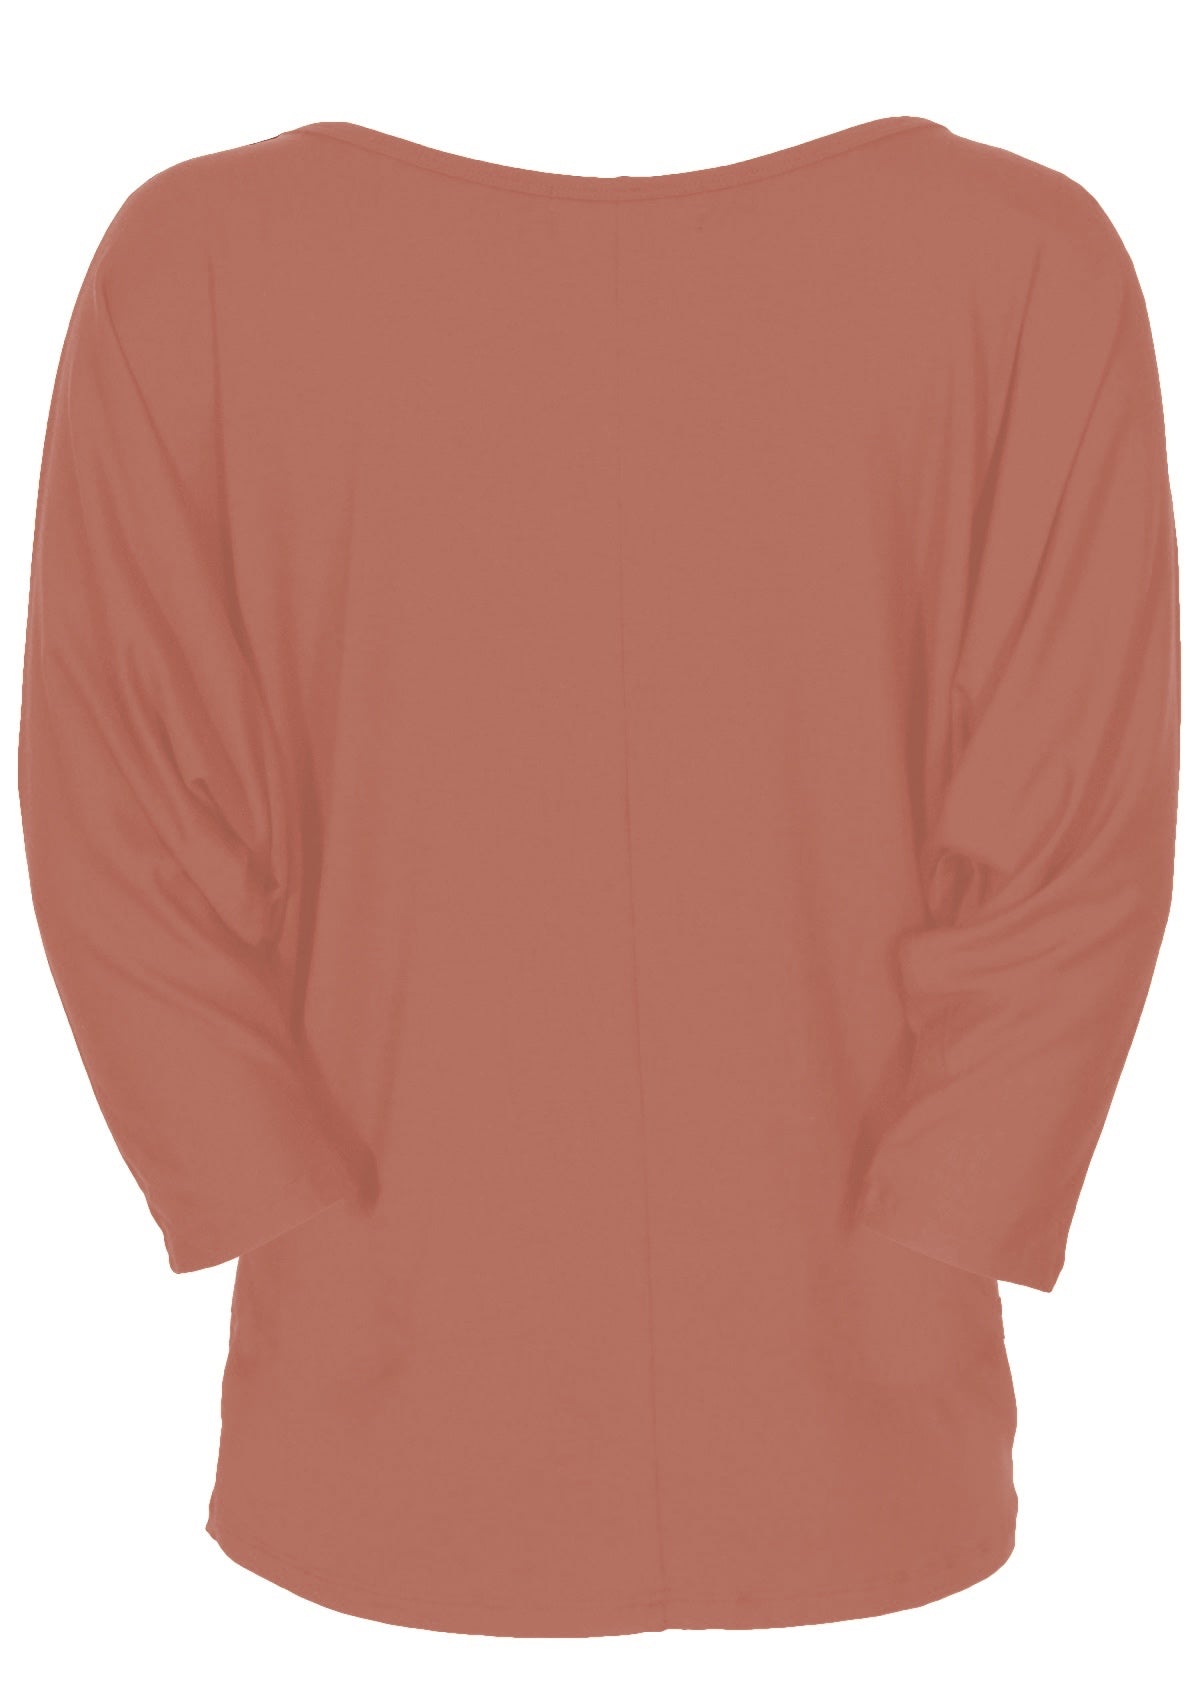 Back view of women's 3/4 sleeve rayon batwing round neckline dusty pink top.